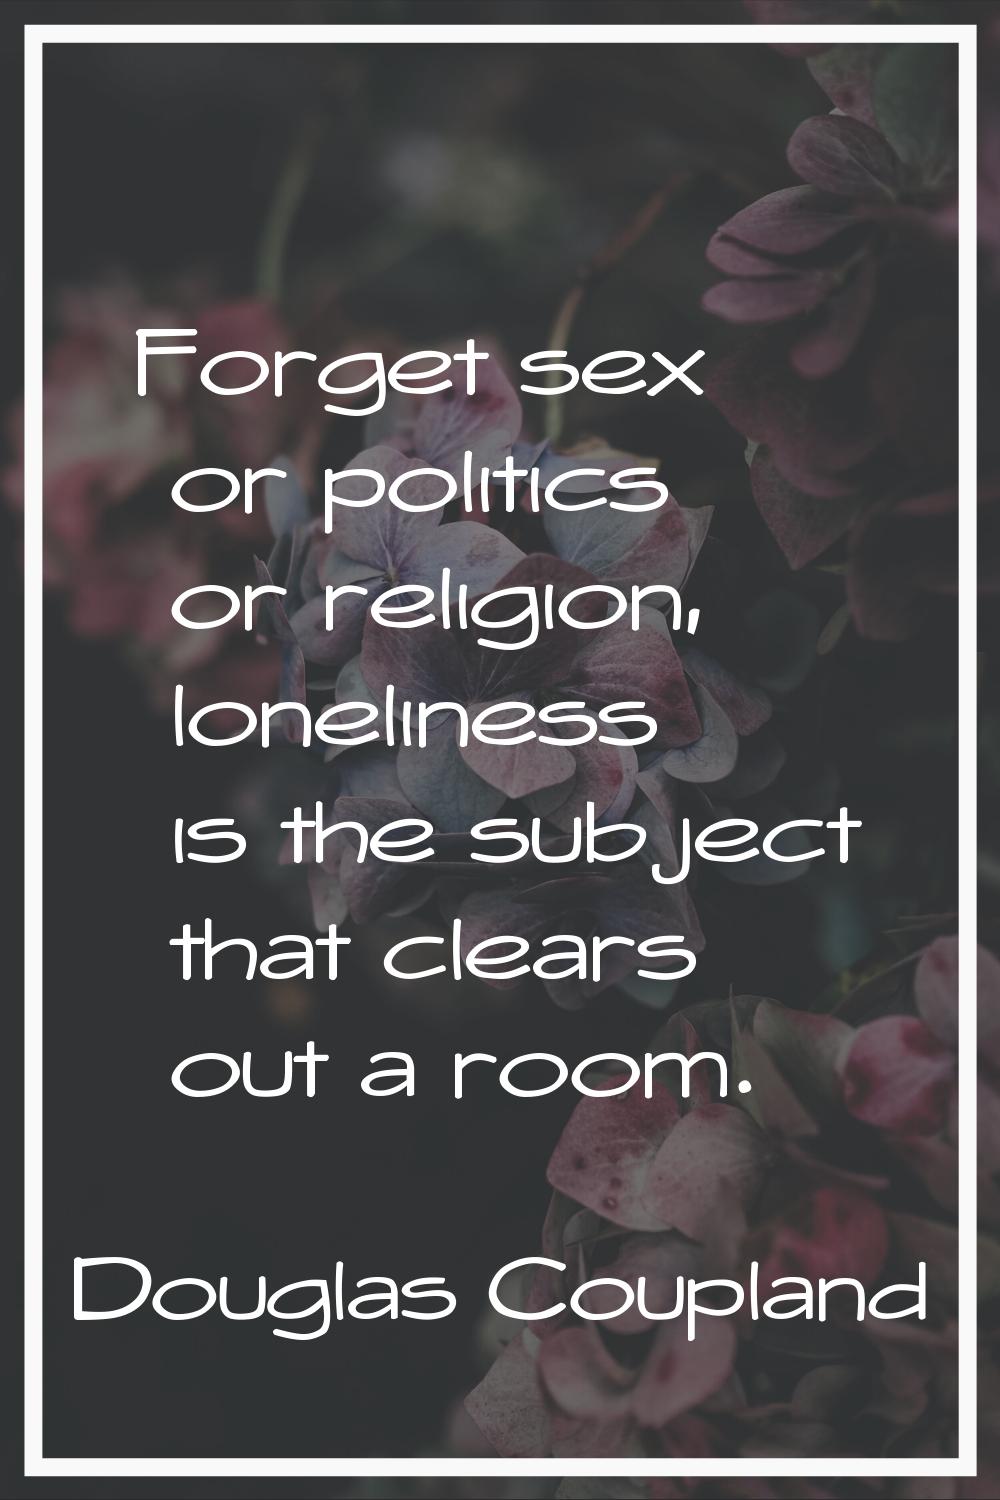 Forget sex or politics or religion, loneliness is the subject that clears out a room.